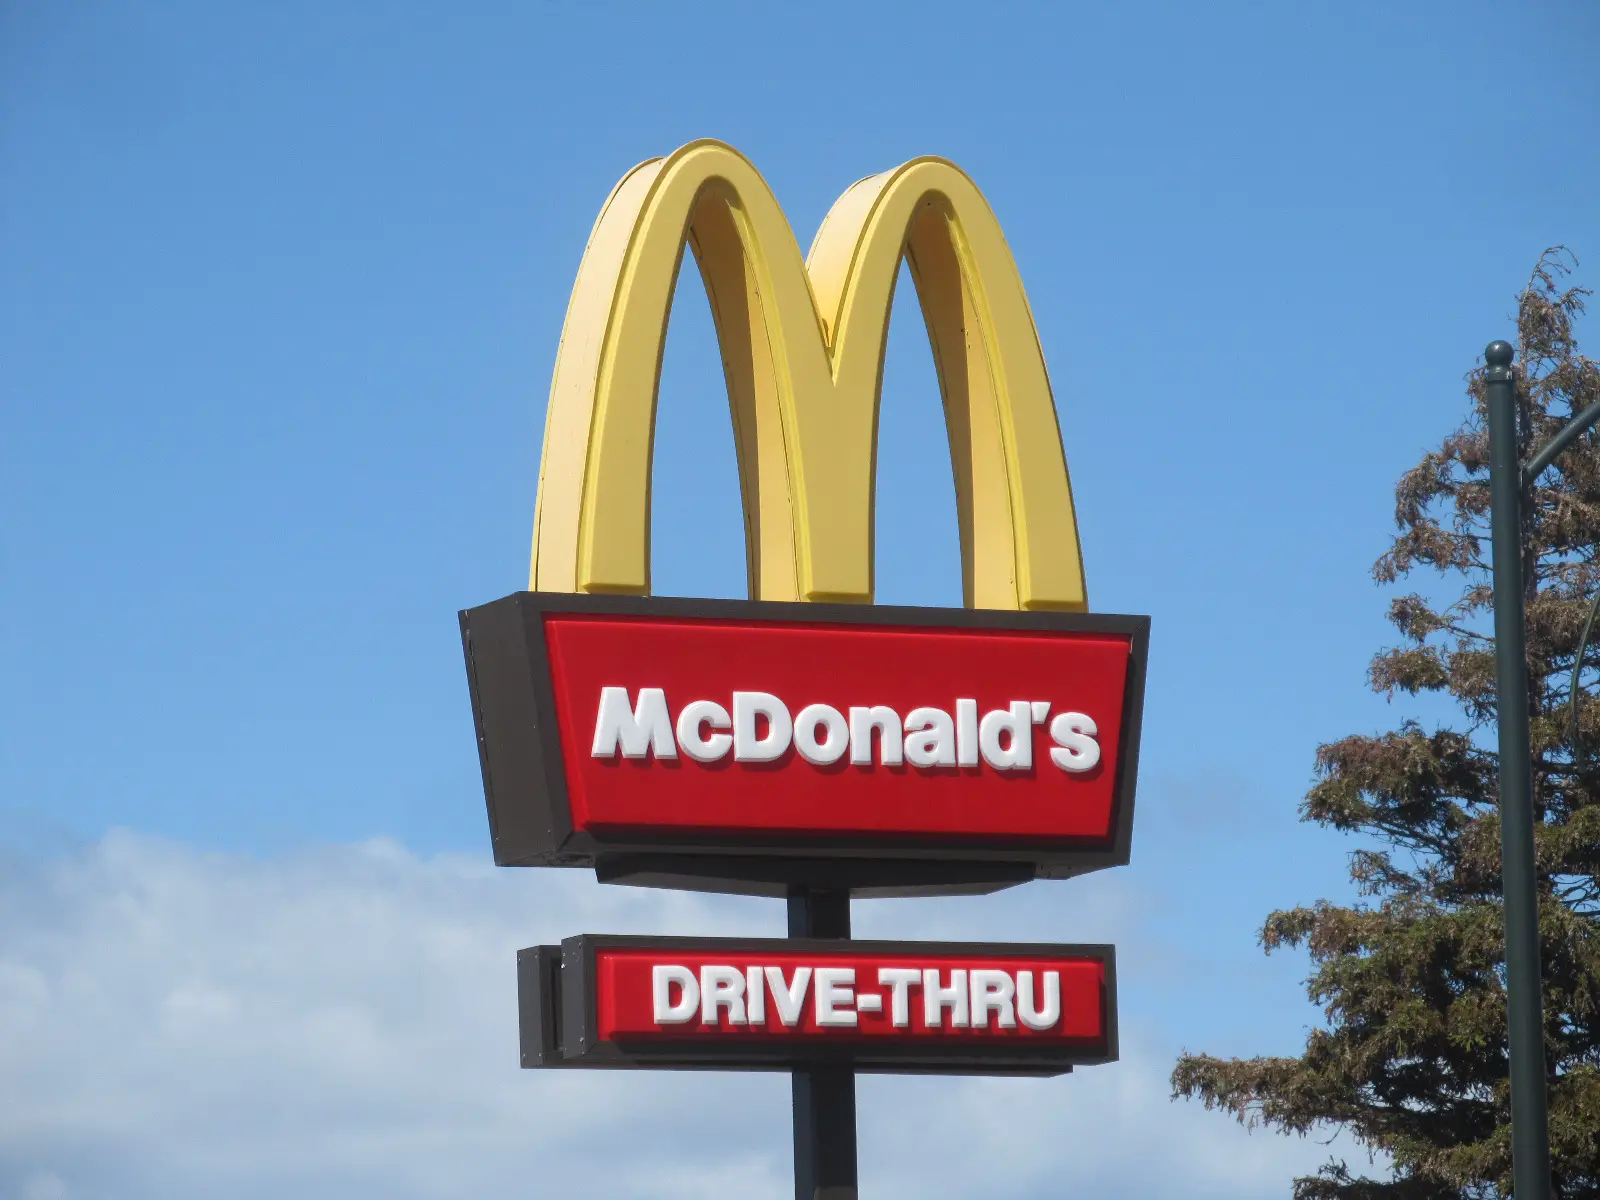 Isle of Wight McDonald's drive-thru re-opening is minutes away | Isle of Wight News from OnTheWight